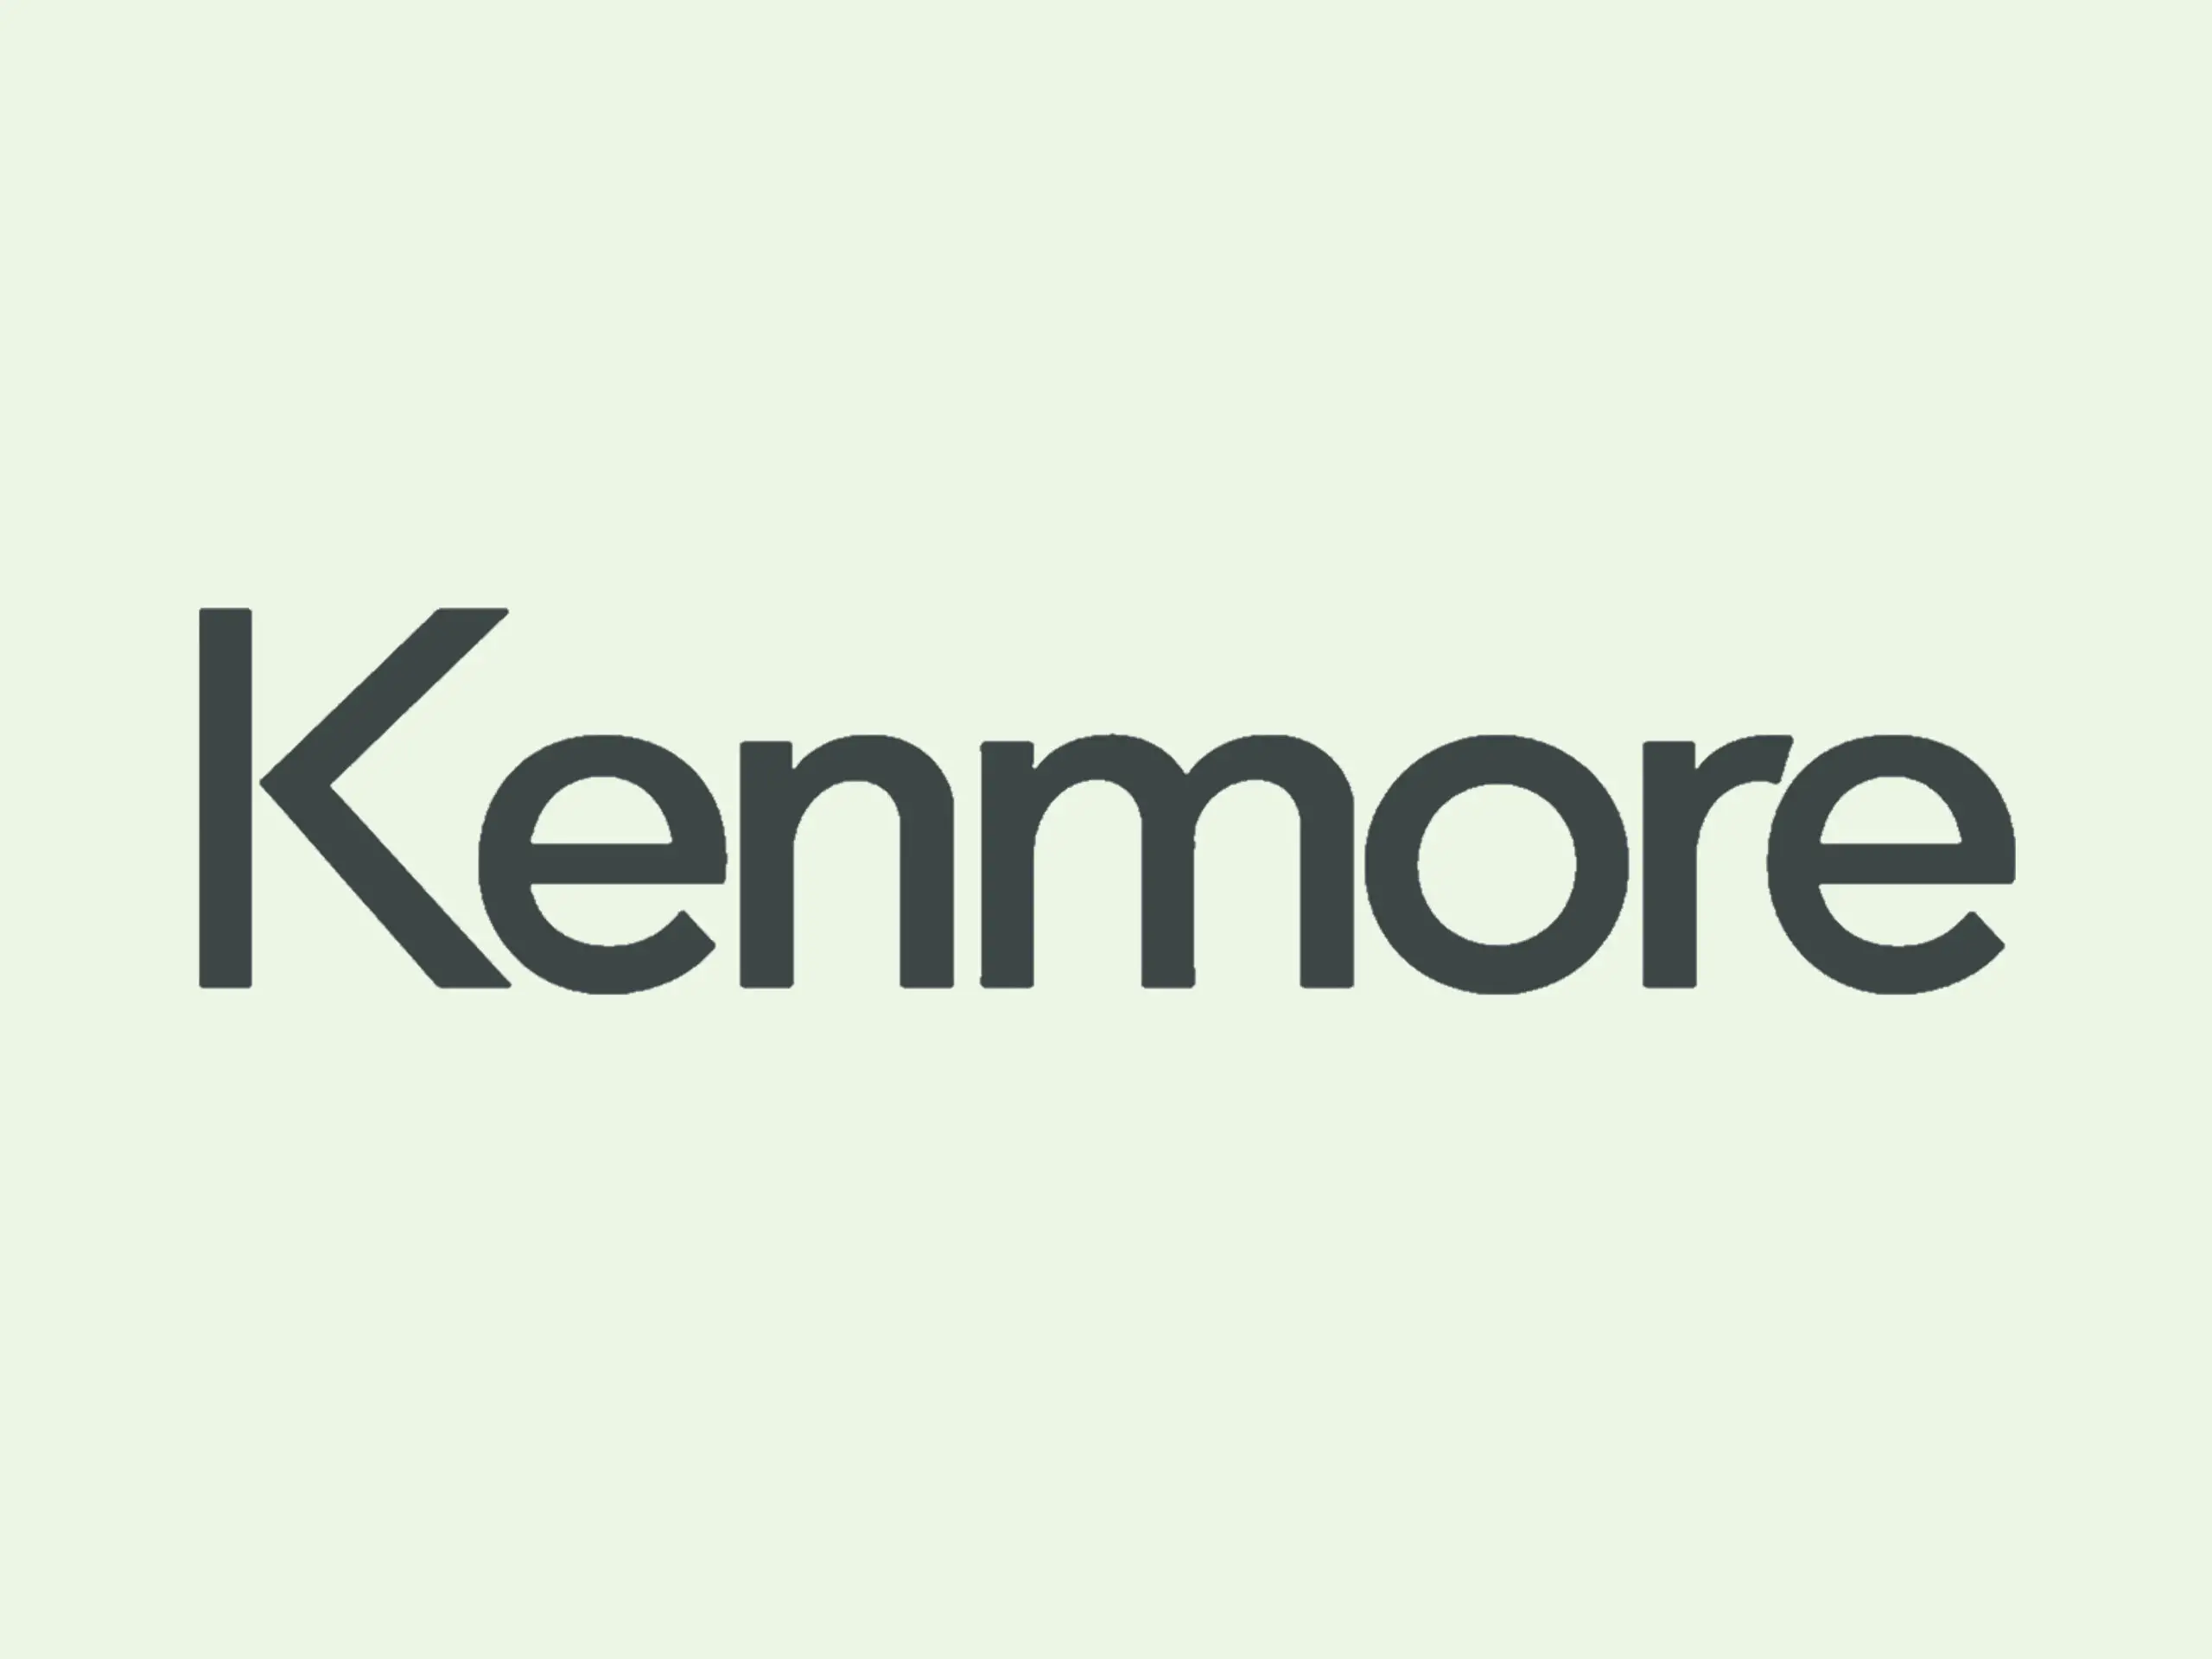 Who makes Kenmore sewing machines?